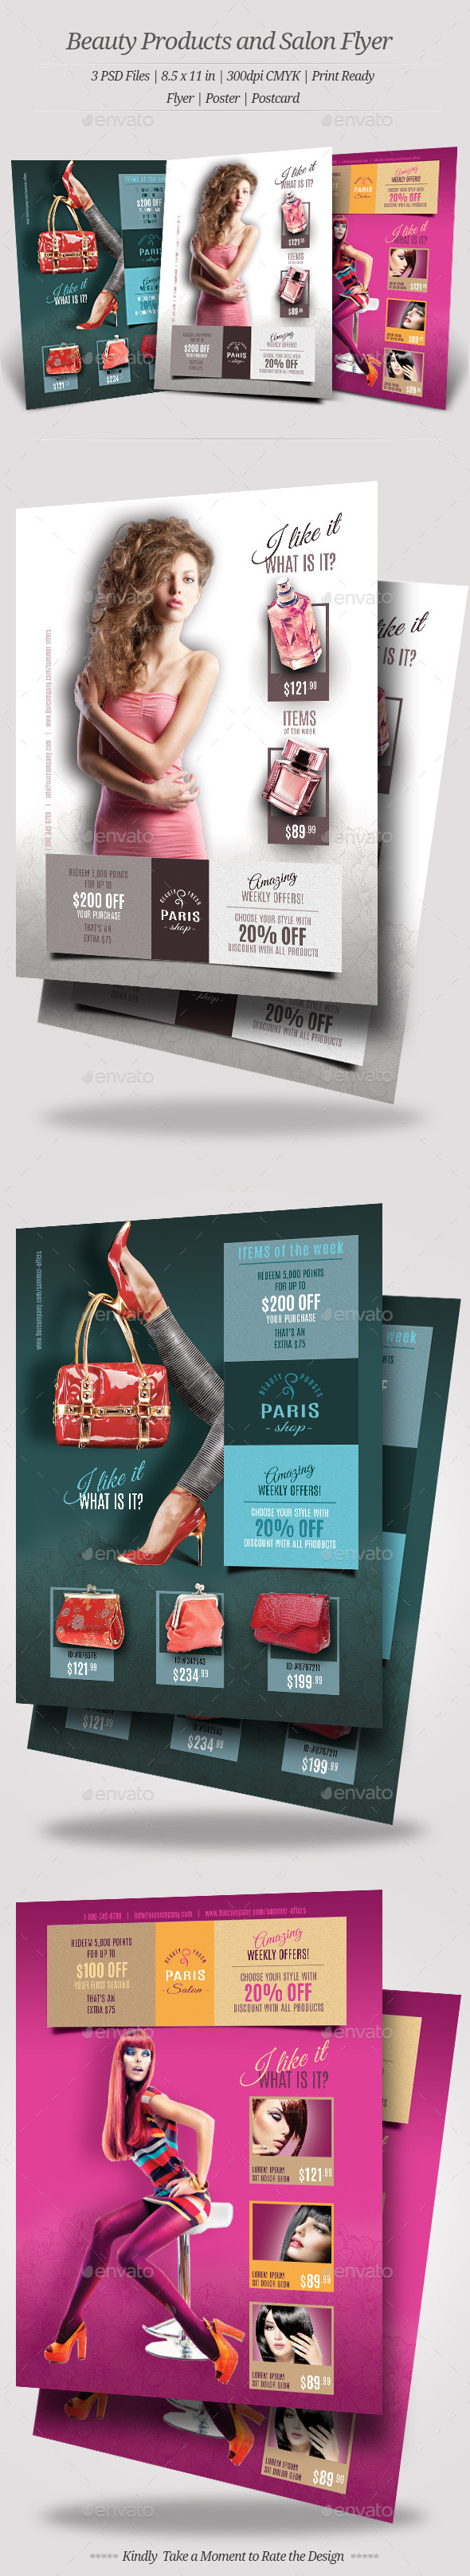 Beauty Products and Salon Flyers